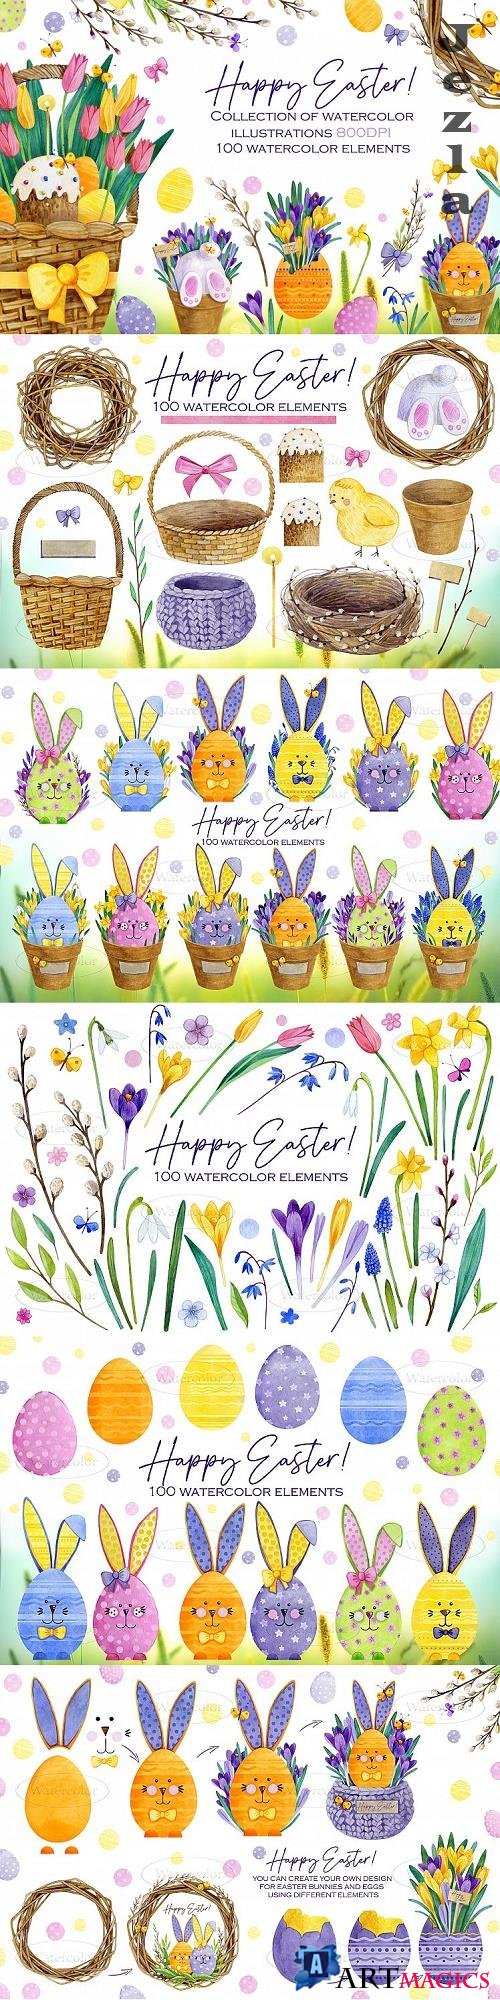 Watercolor Happy Easter Bunnies collection - 518999